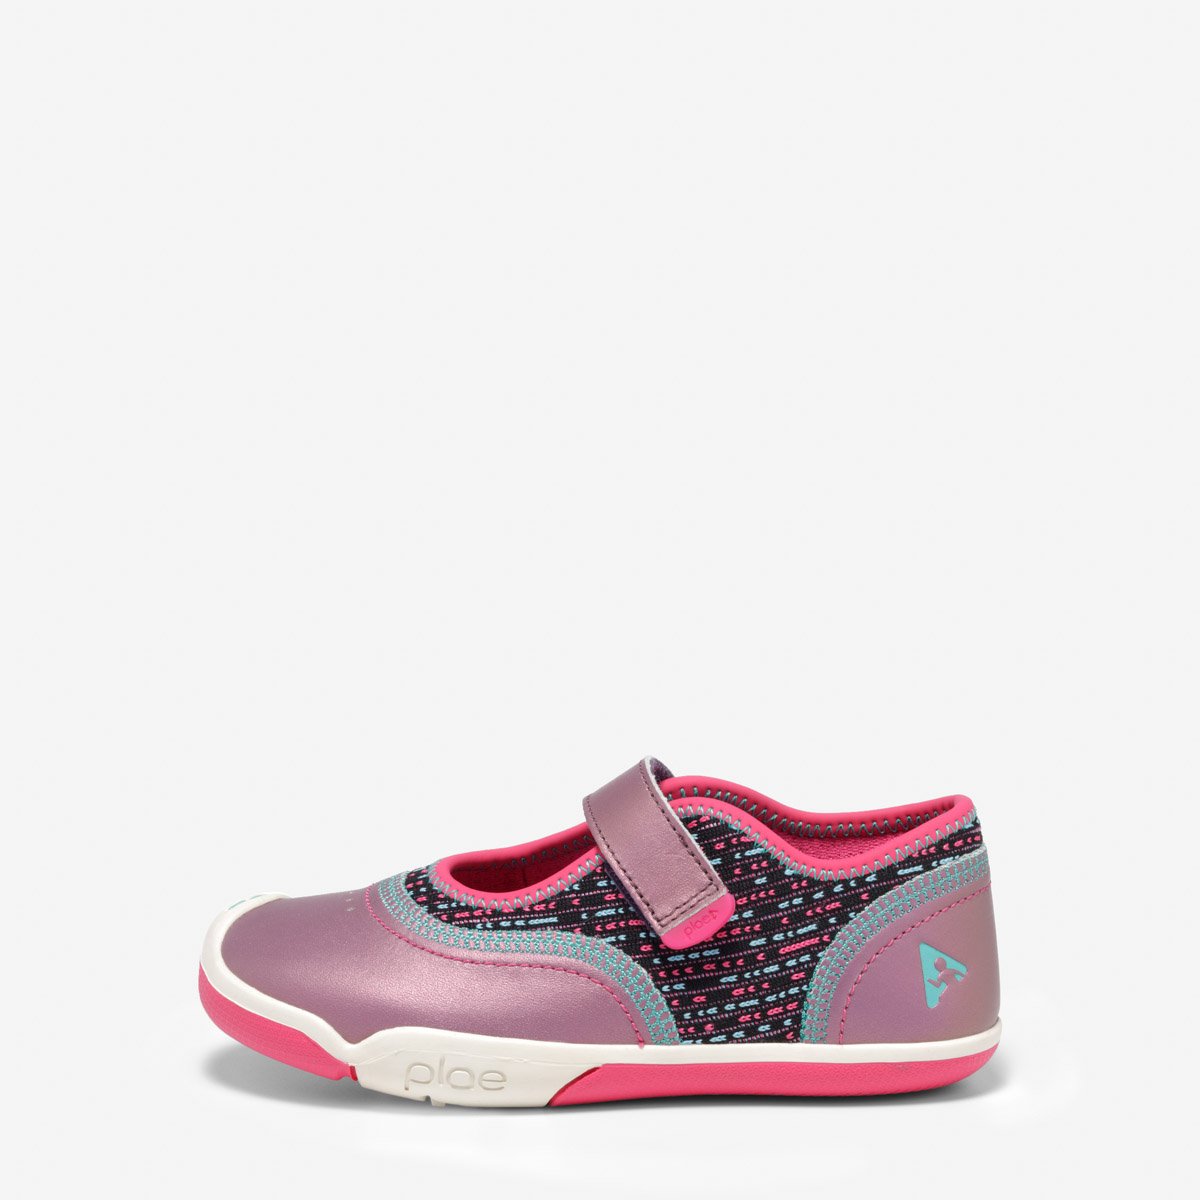 Emme Imperial Garnet - PLAE Kids Shoes - Mary Janes